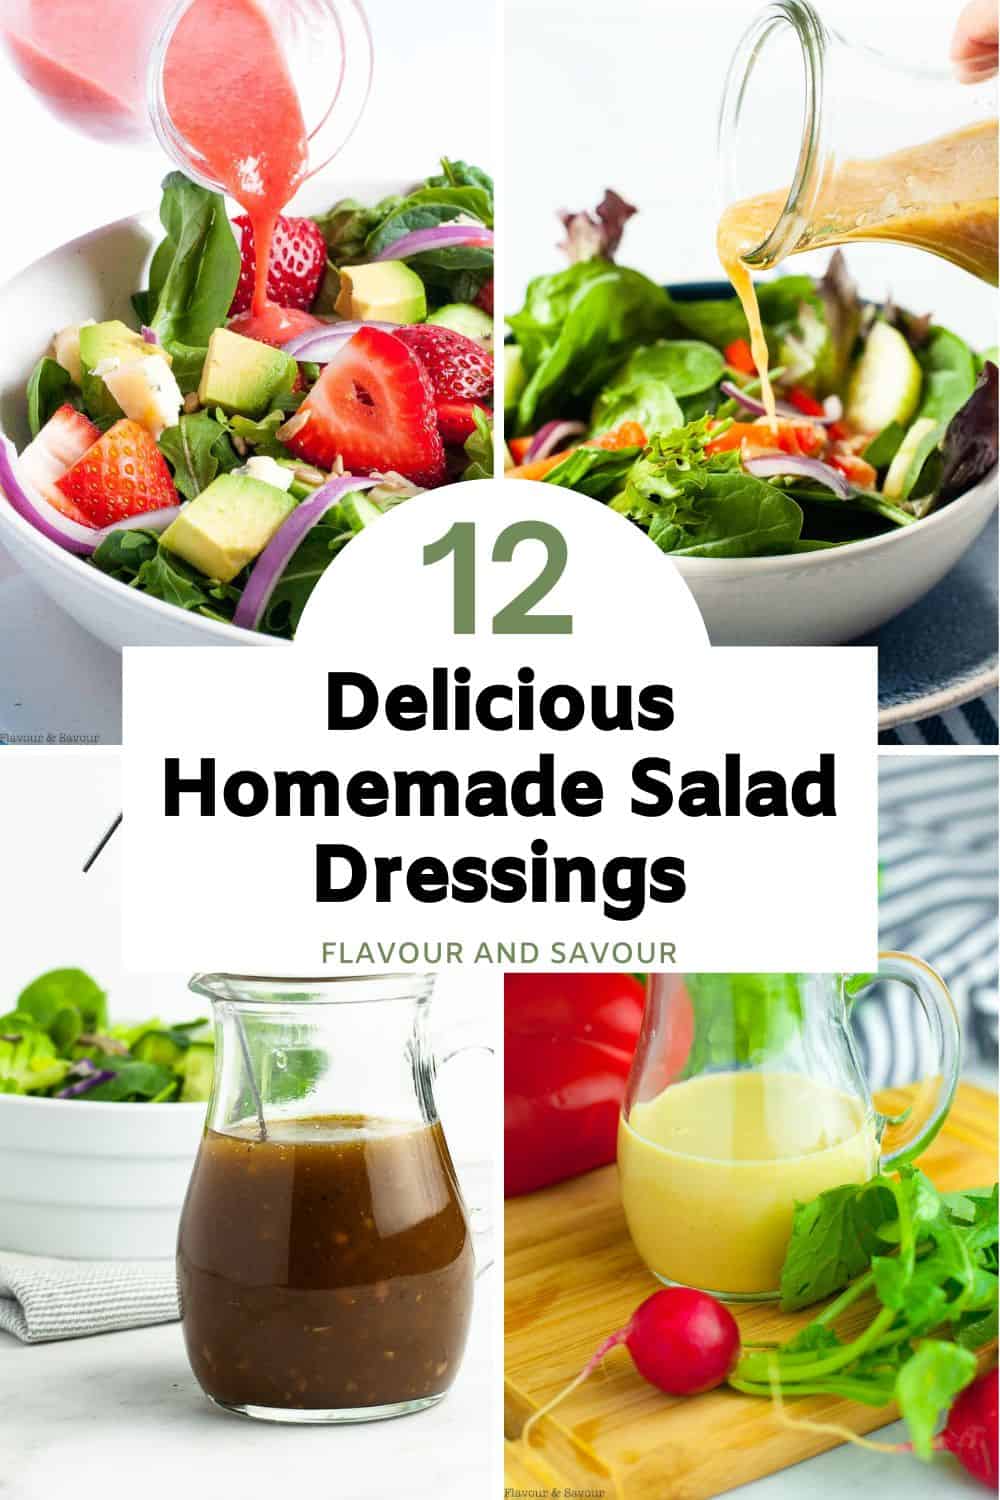 A collage of images with text overlay for 12 homemade salad dressings.